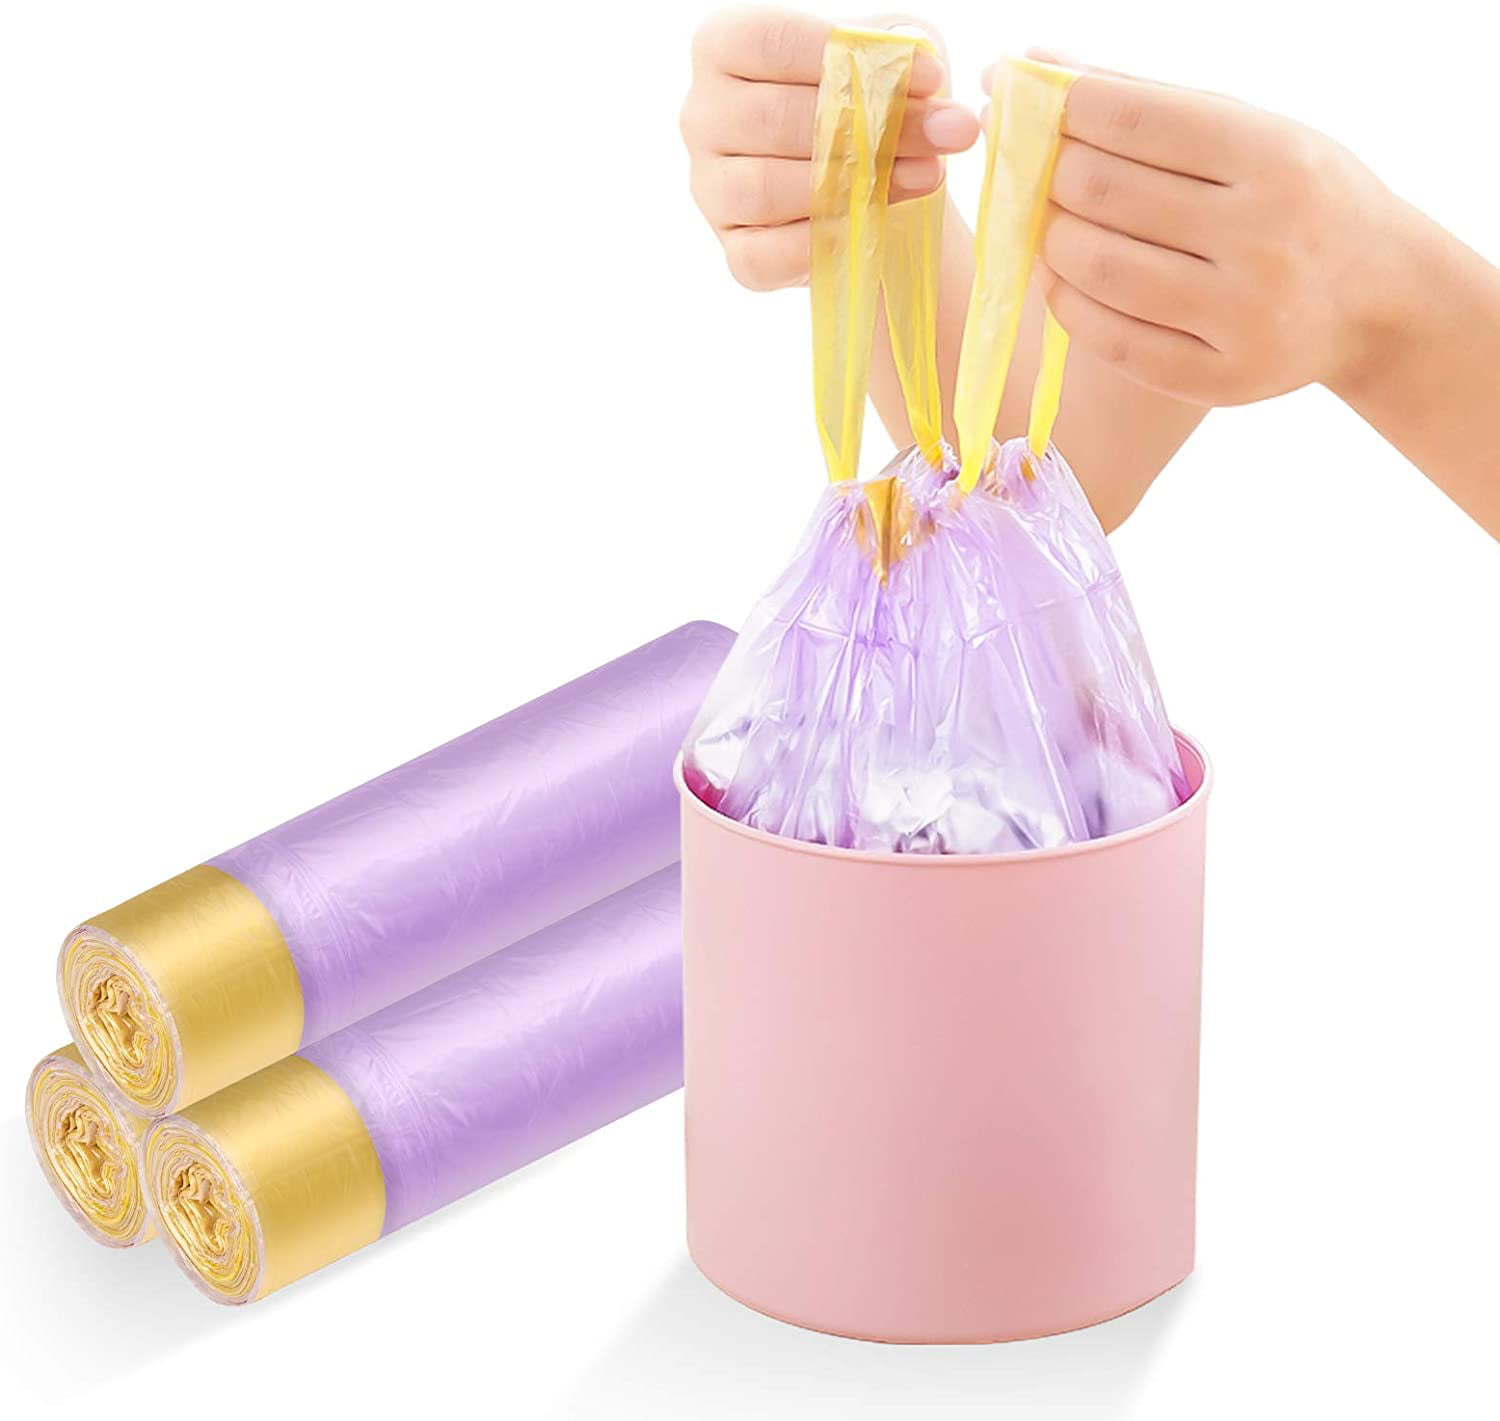 Purple 60 Packs LASMEX Disposable Drawstring Hanging Trash Bags with Car Headrest Hook Hanger 1.2 Gallon Small Car Auto Garbage Leak-proof Vomit Bags for Car Desk Office Bathroom Camping Travel 